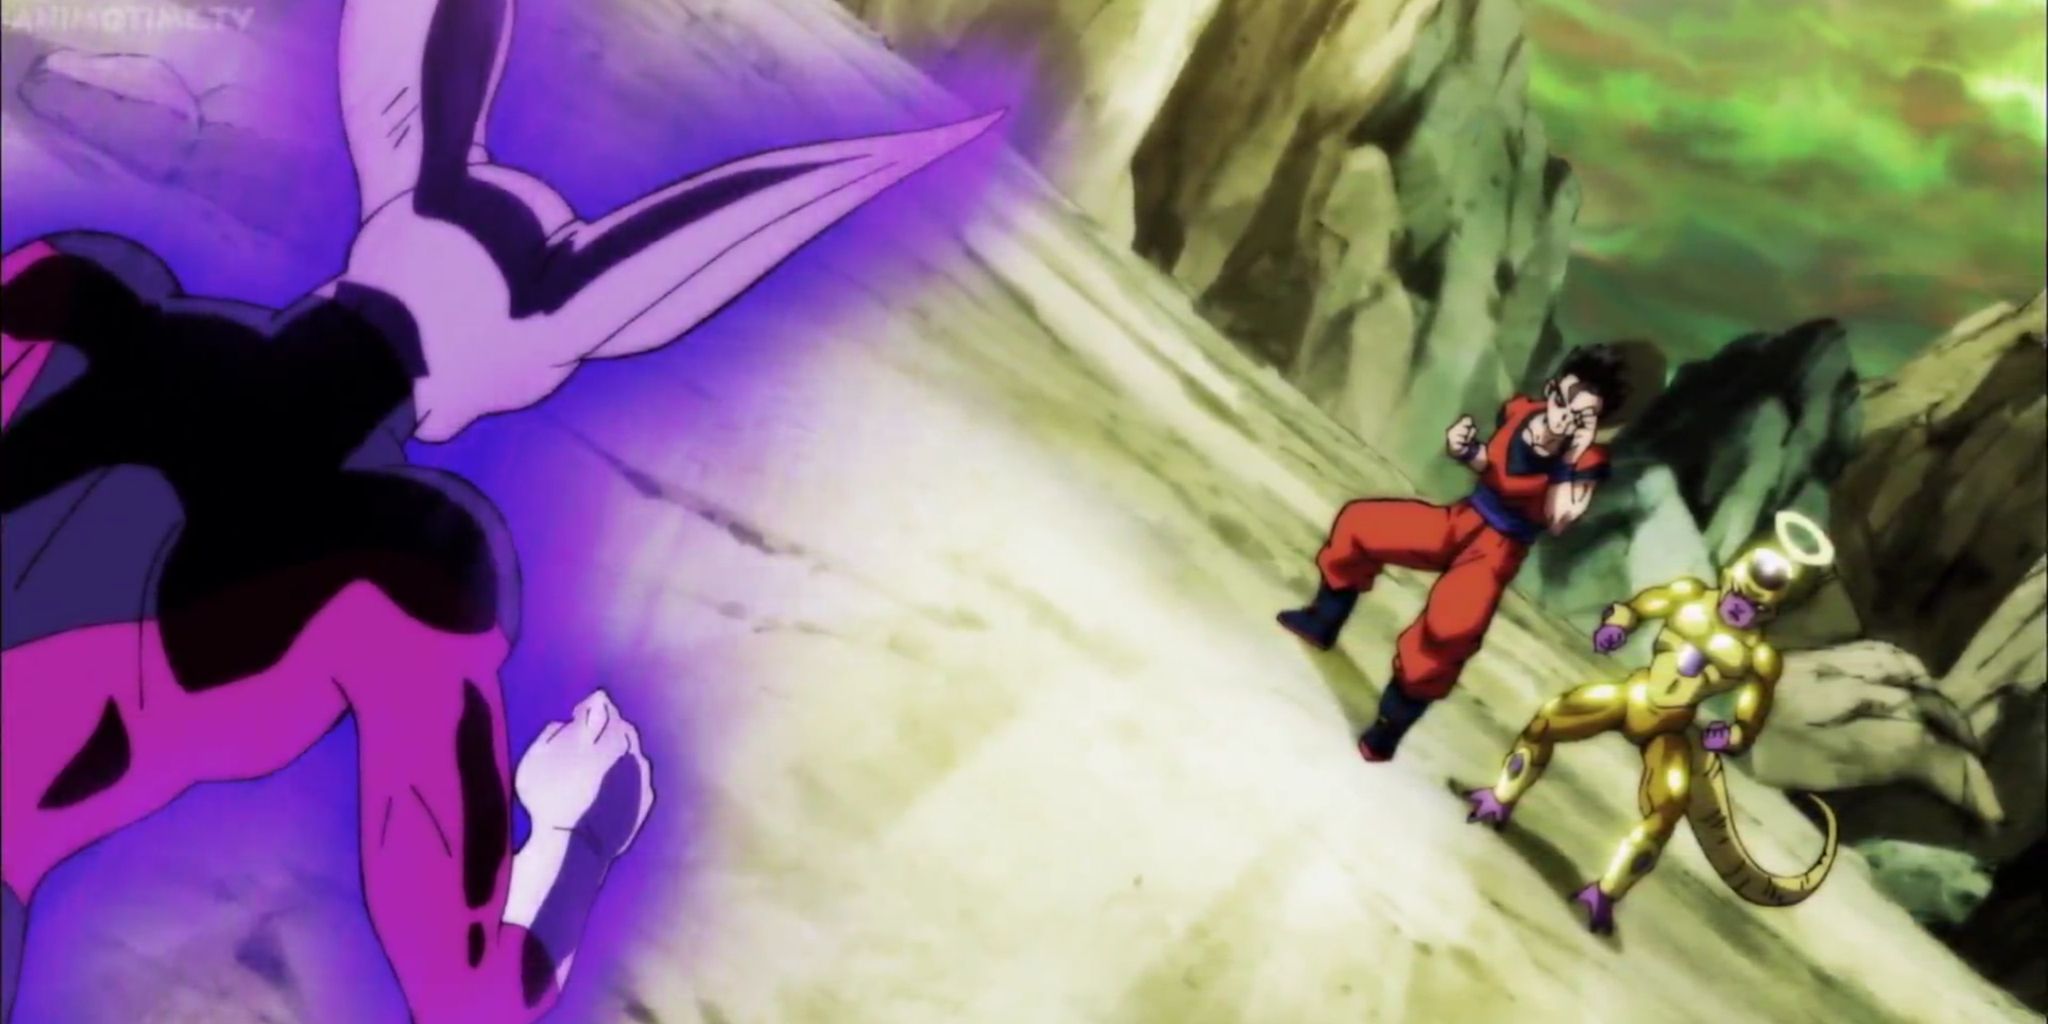 Gohan's Best Fights in All of Dragon Ball, Ranked